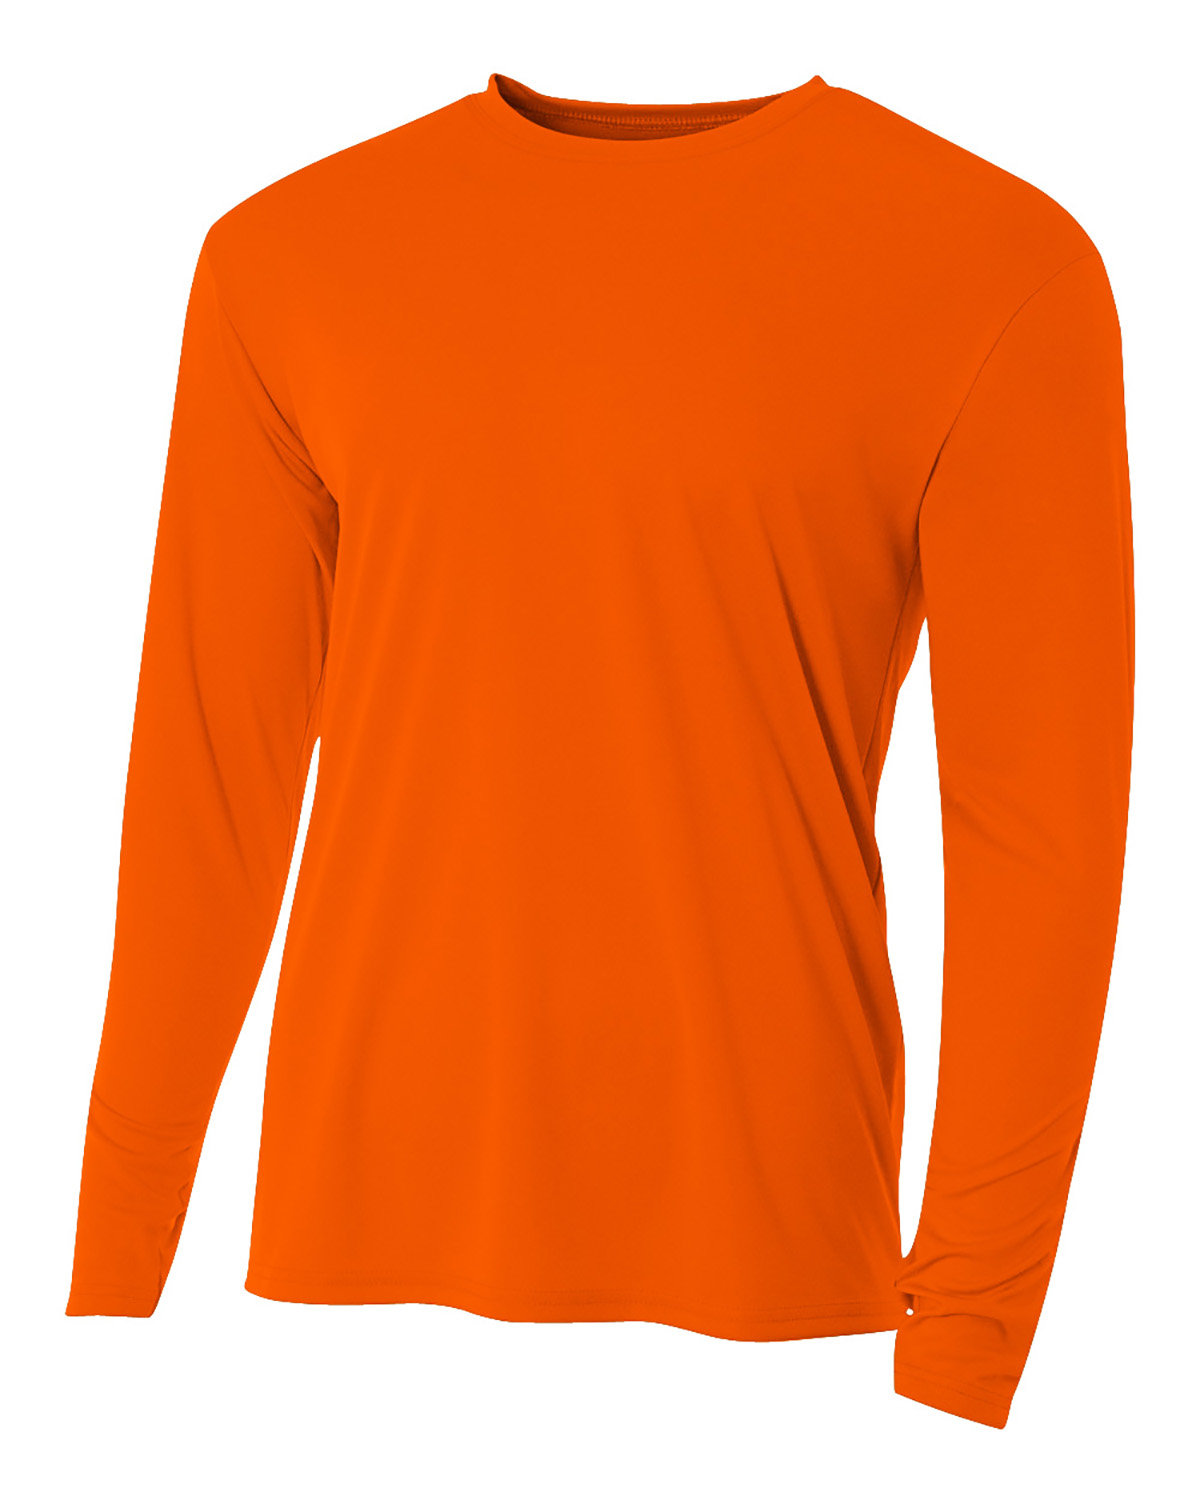 A4 Youth Long Sleeve Cooling Performance Crew Shirt SAFETY ORANGE 